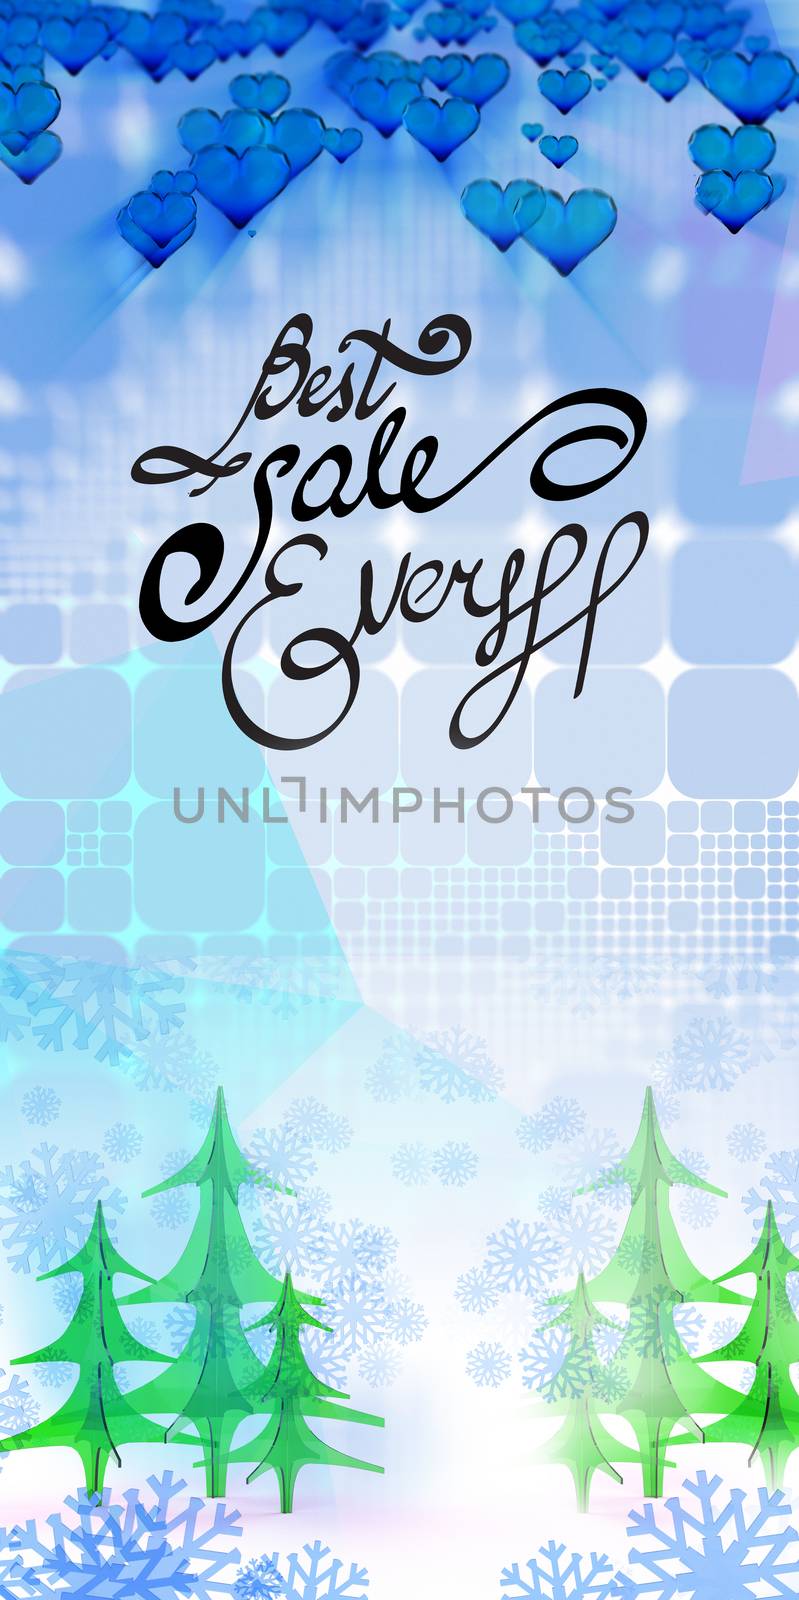 Best Sale Ever letering on geometric square abstract background with christmas tree hearts and snowflakes. 3d illustration by skrotov